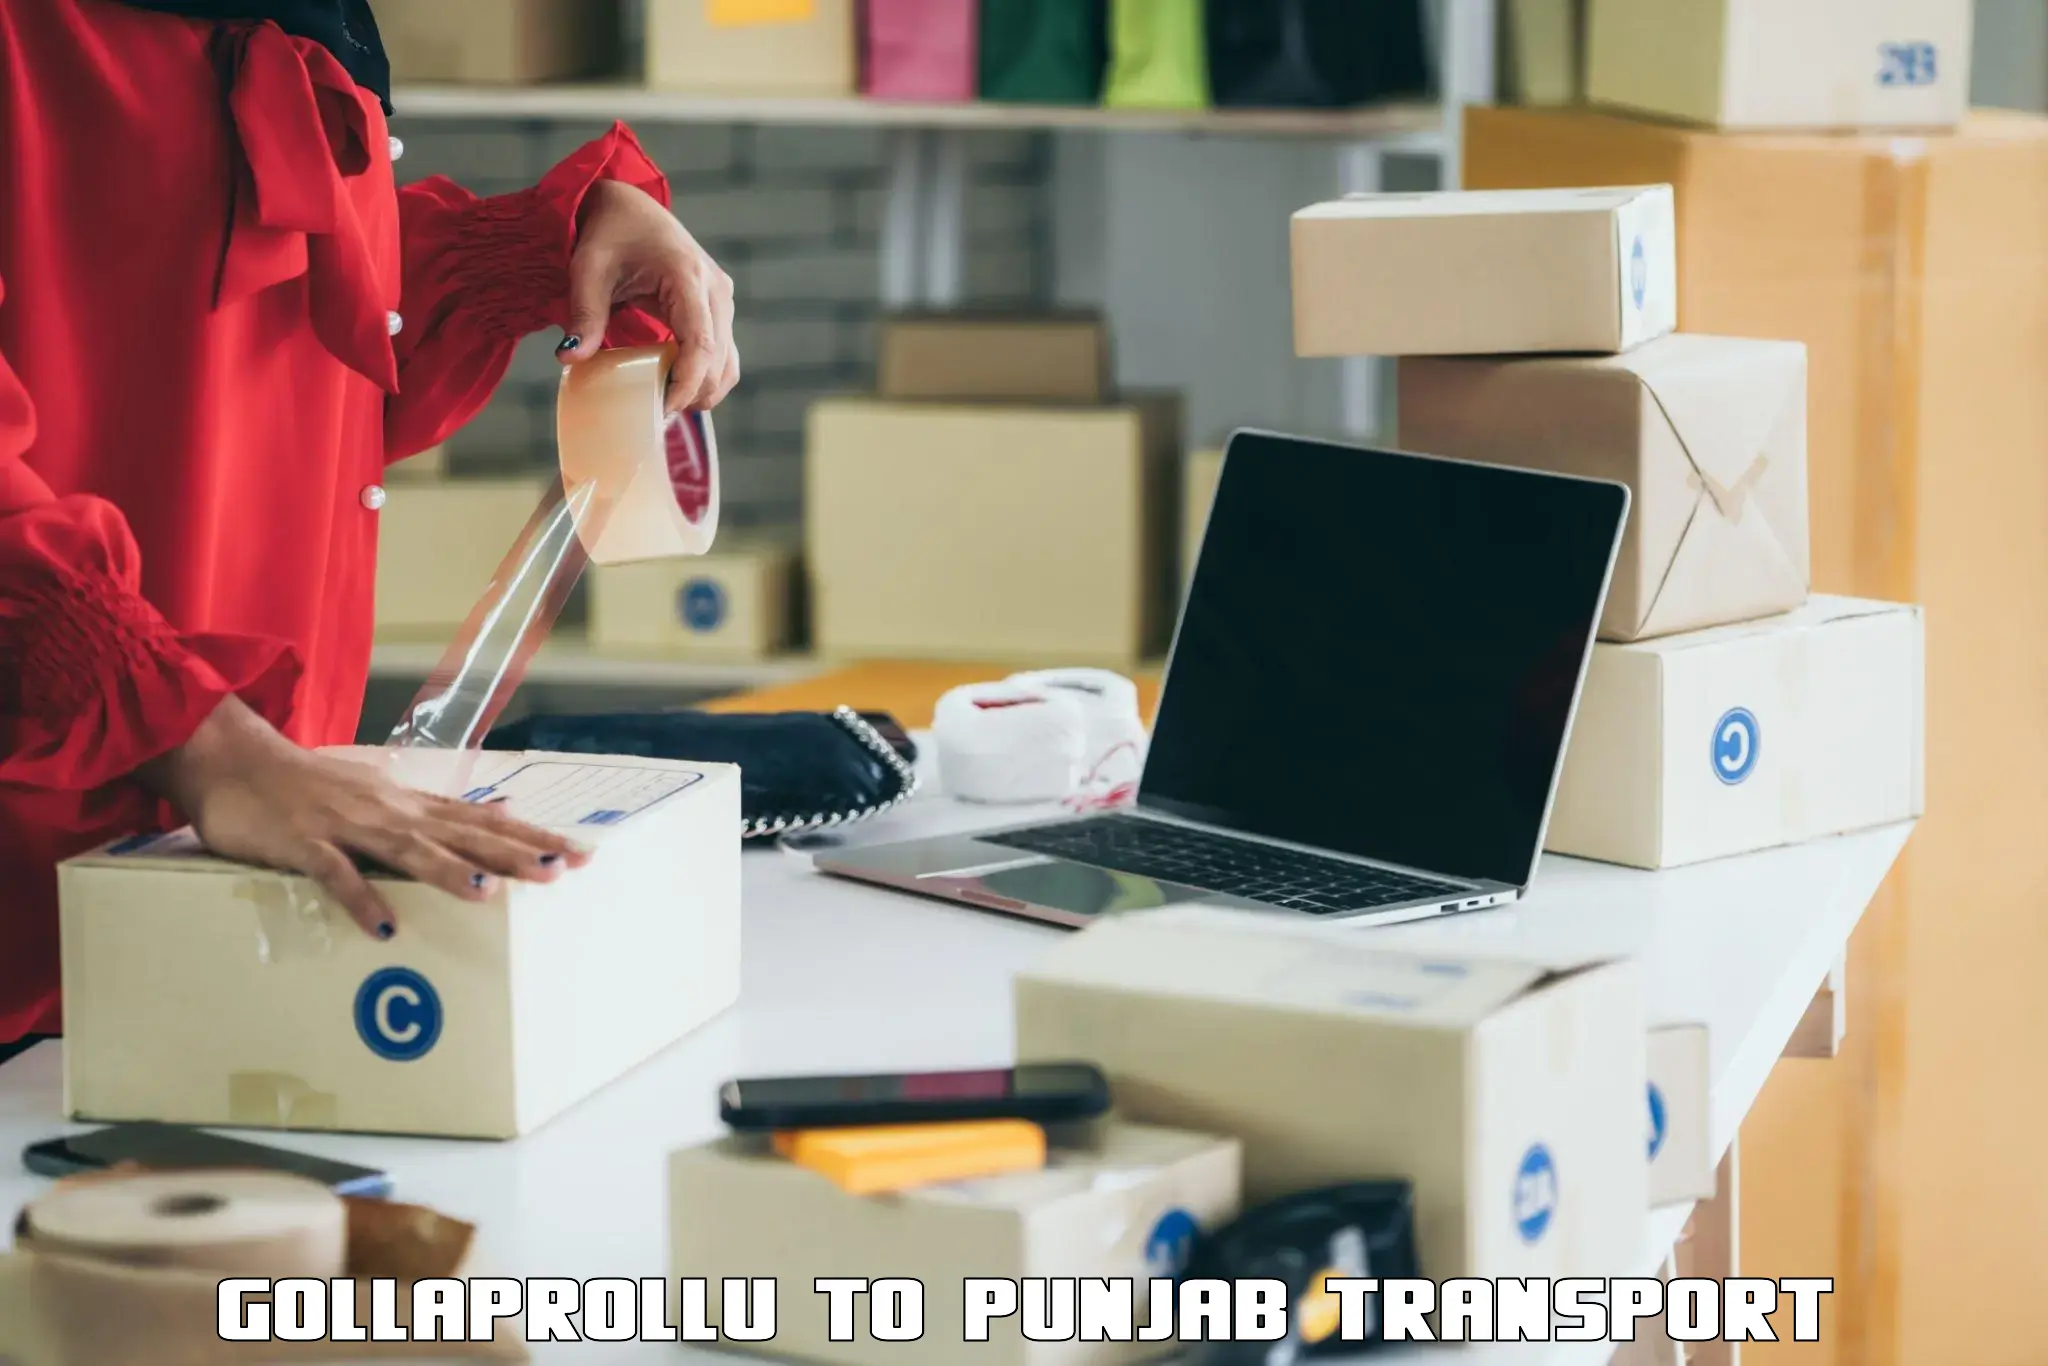 Road transport online services Gollaprollu to Barnala